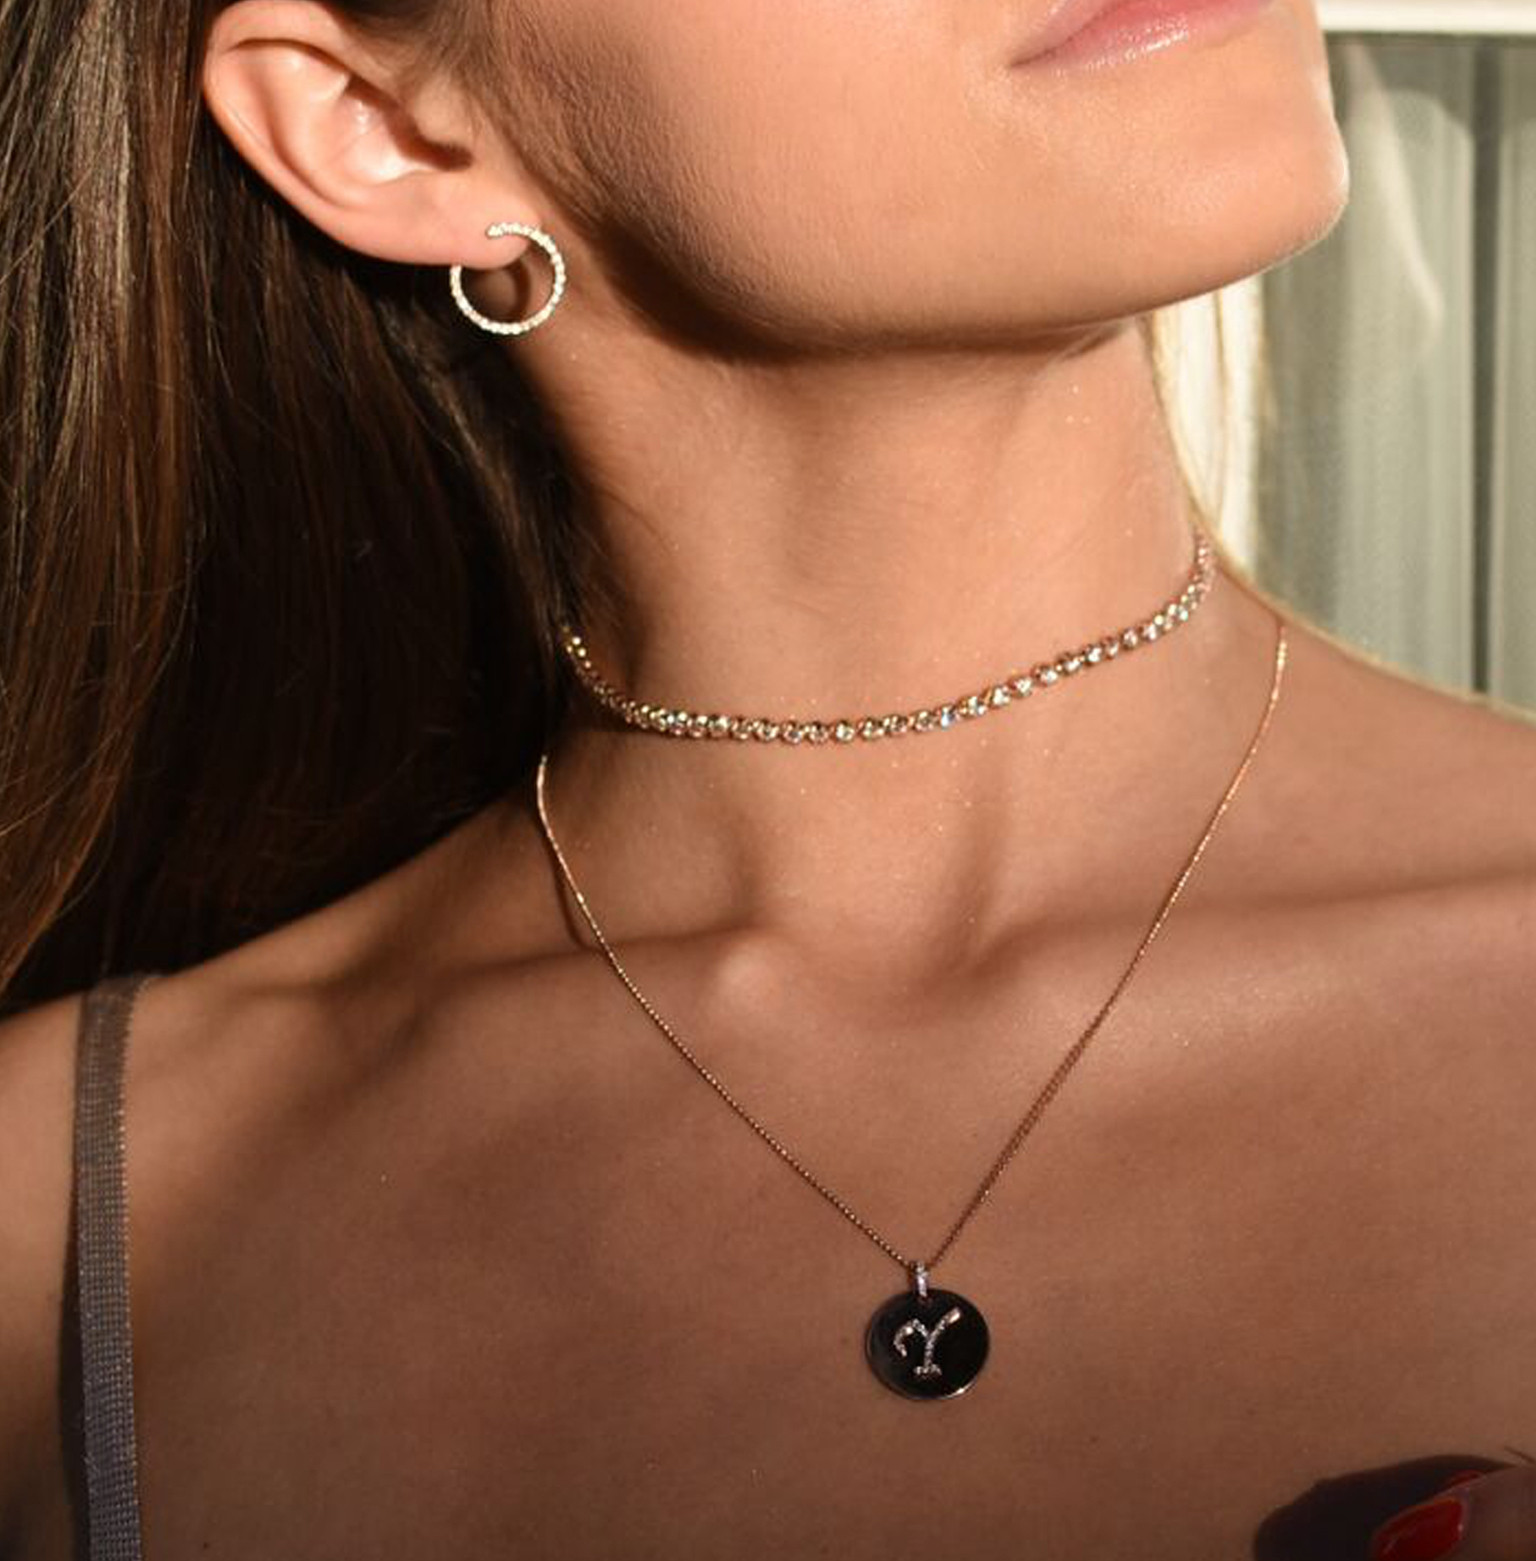 Carbon & Hyde Renata Diamond Initial Necklace in 14K Gold on model